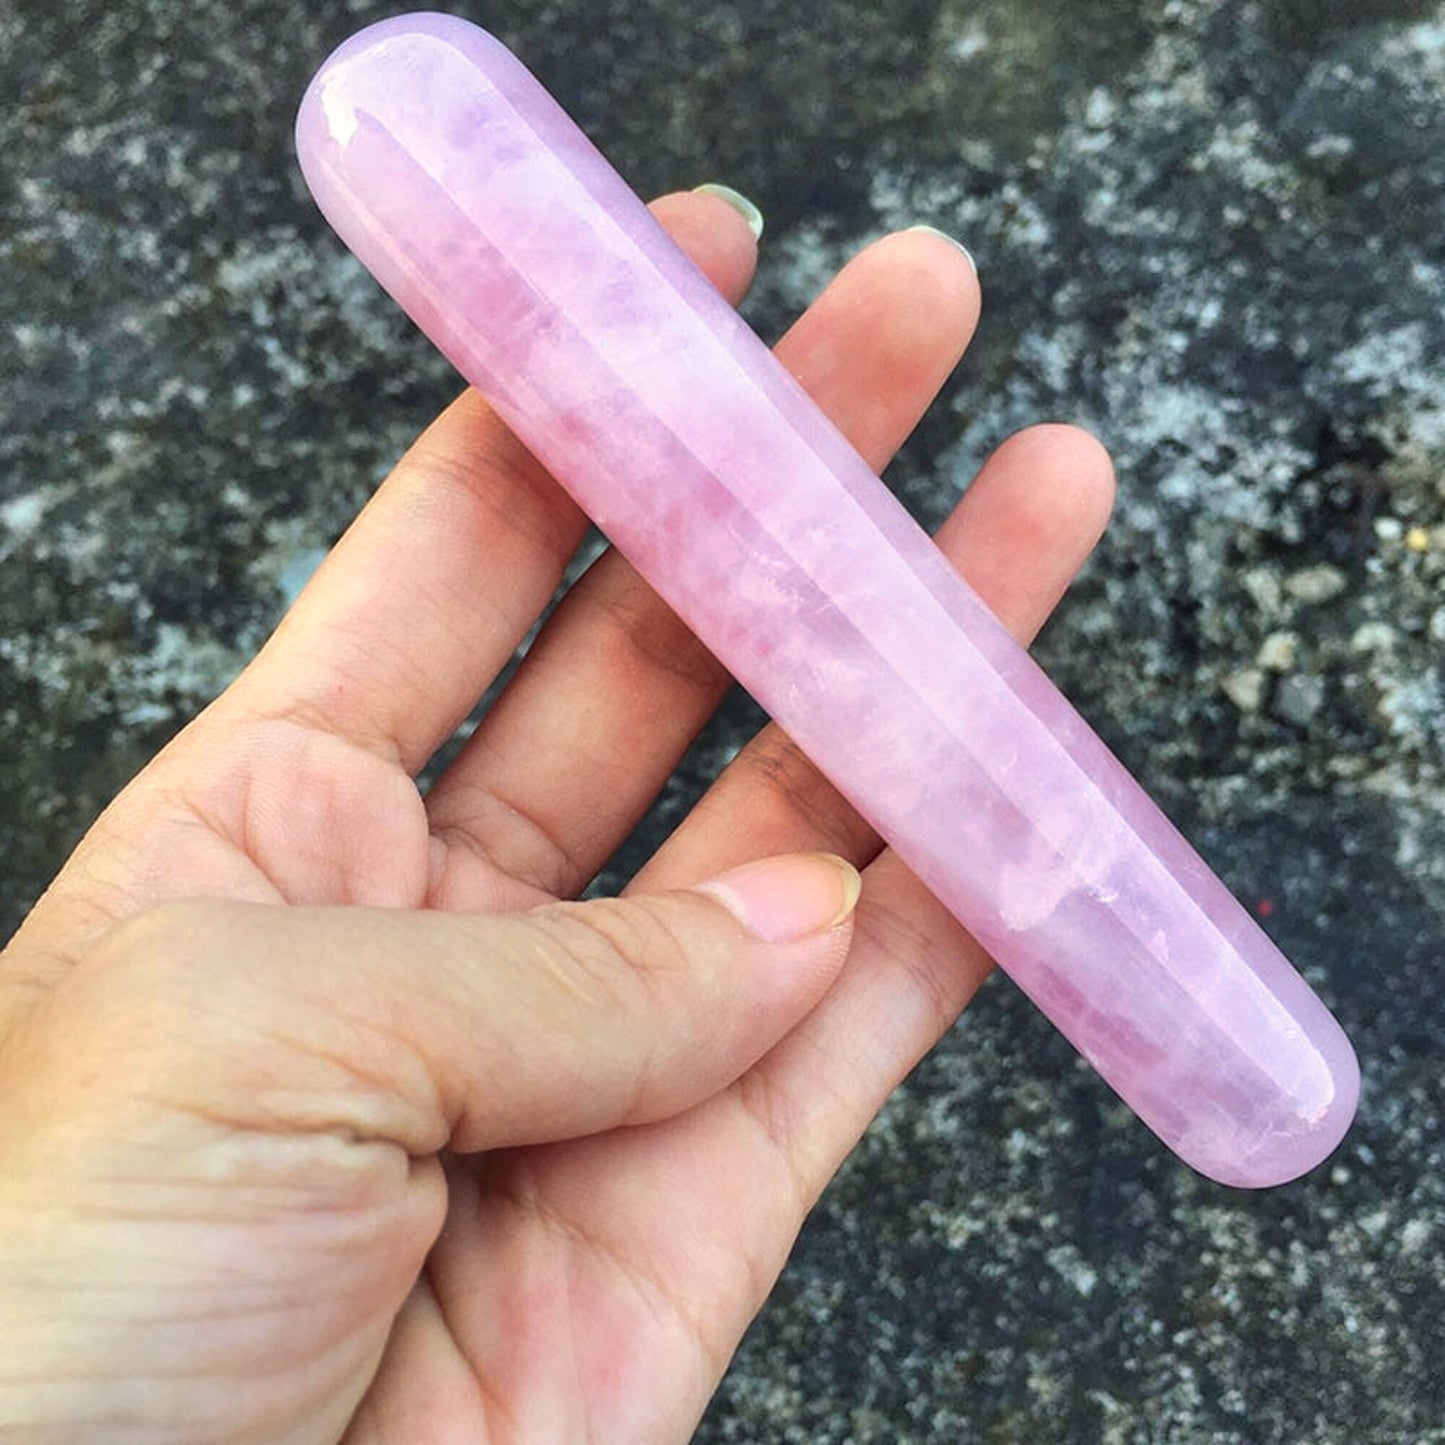 Natural Rose Quartz Crystal Massage Wand for Relaxation, Reiki Healing, and Chakra Face & Body Massage - Acupoint Point Stick